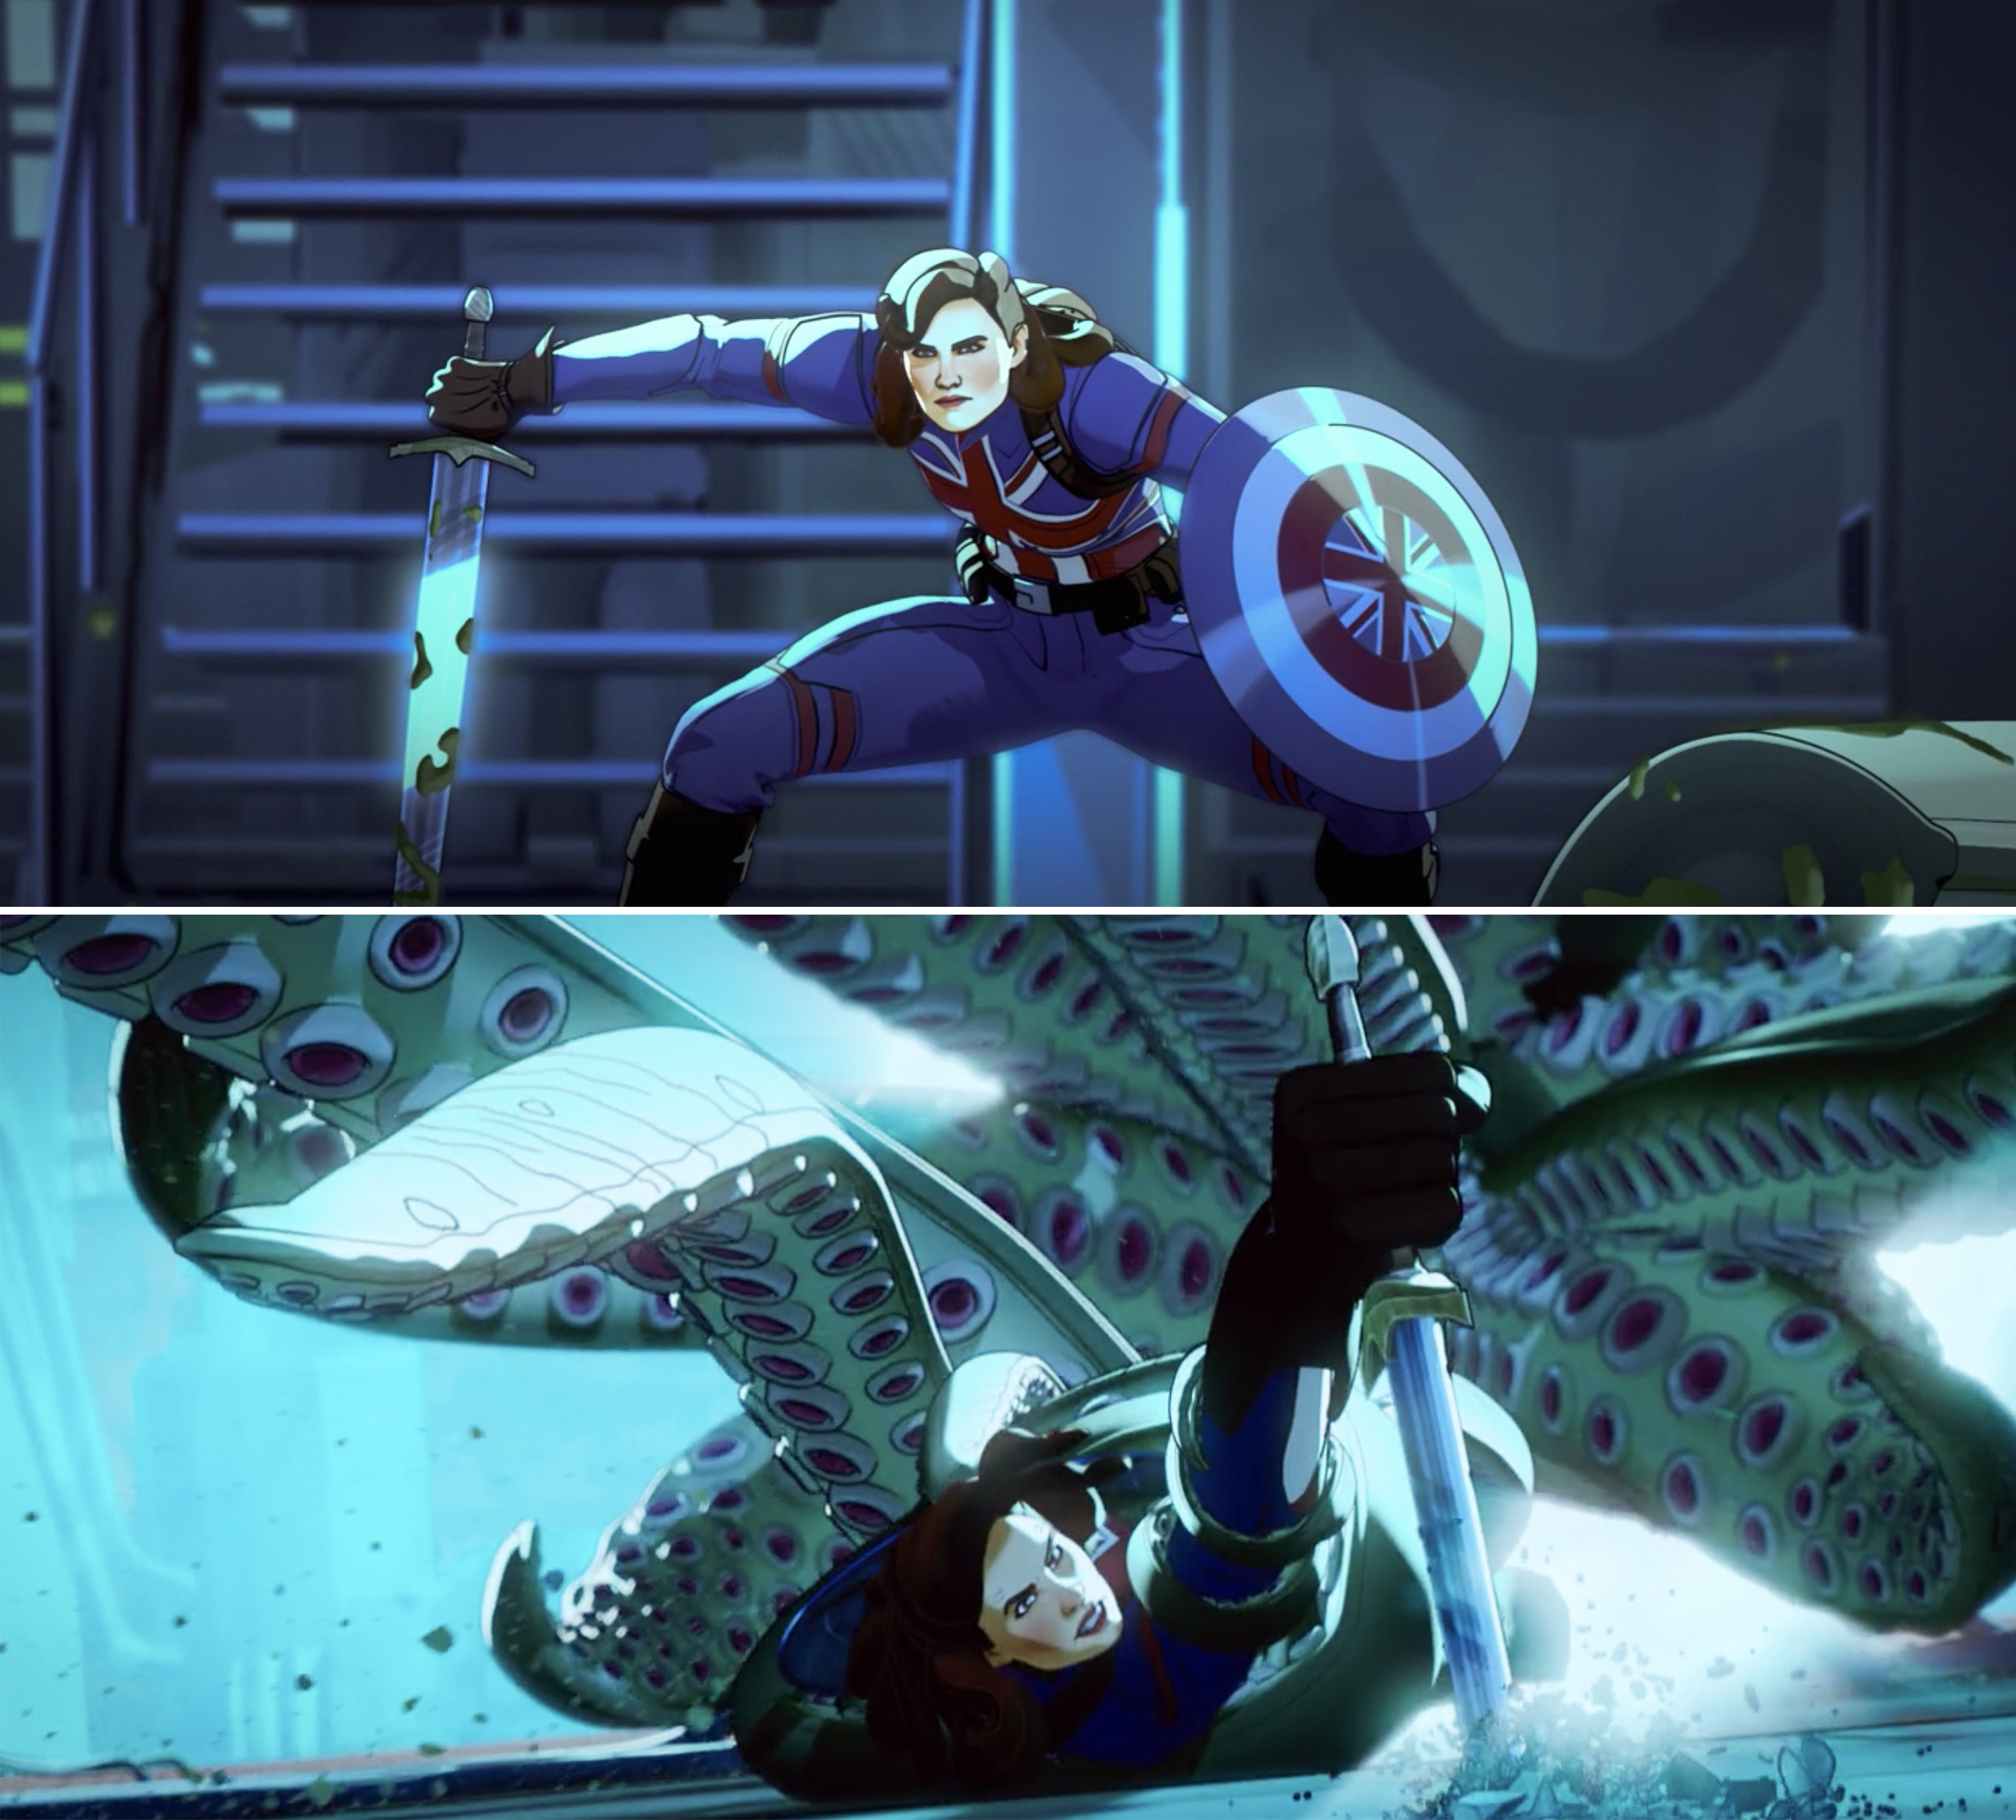 Peggy wielding a sword against a tentacle monster